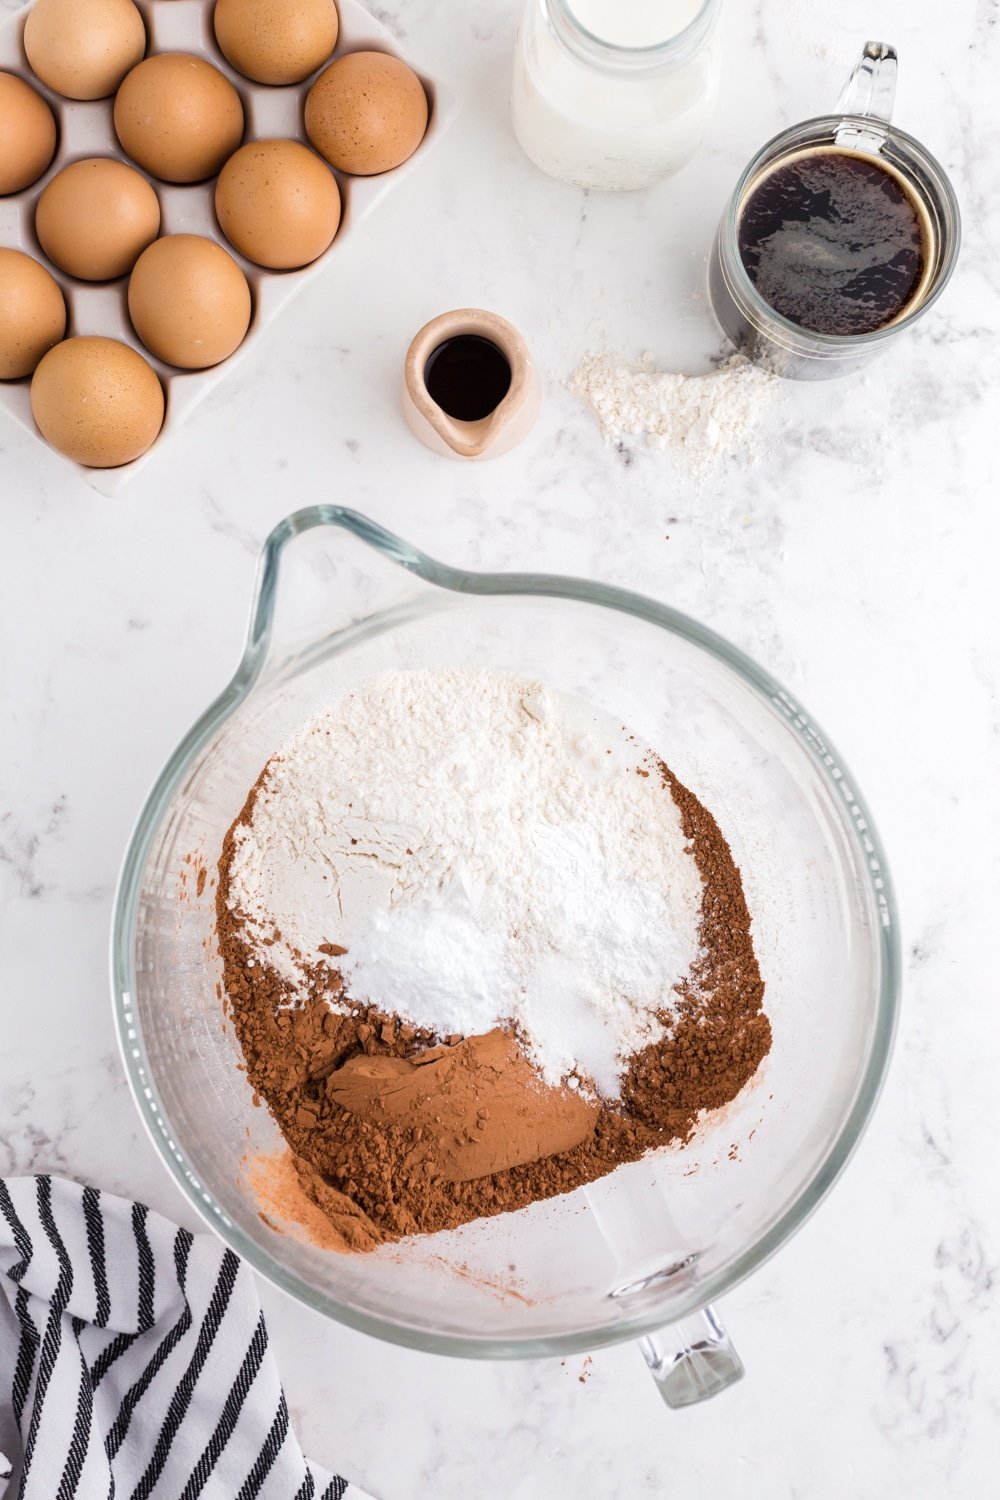 Flour, cocoa powder, and dry ingredients in bowl of a standing mixer.